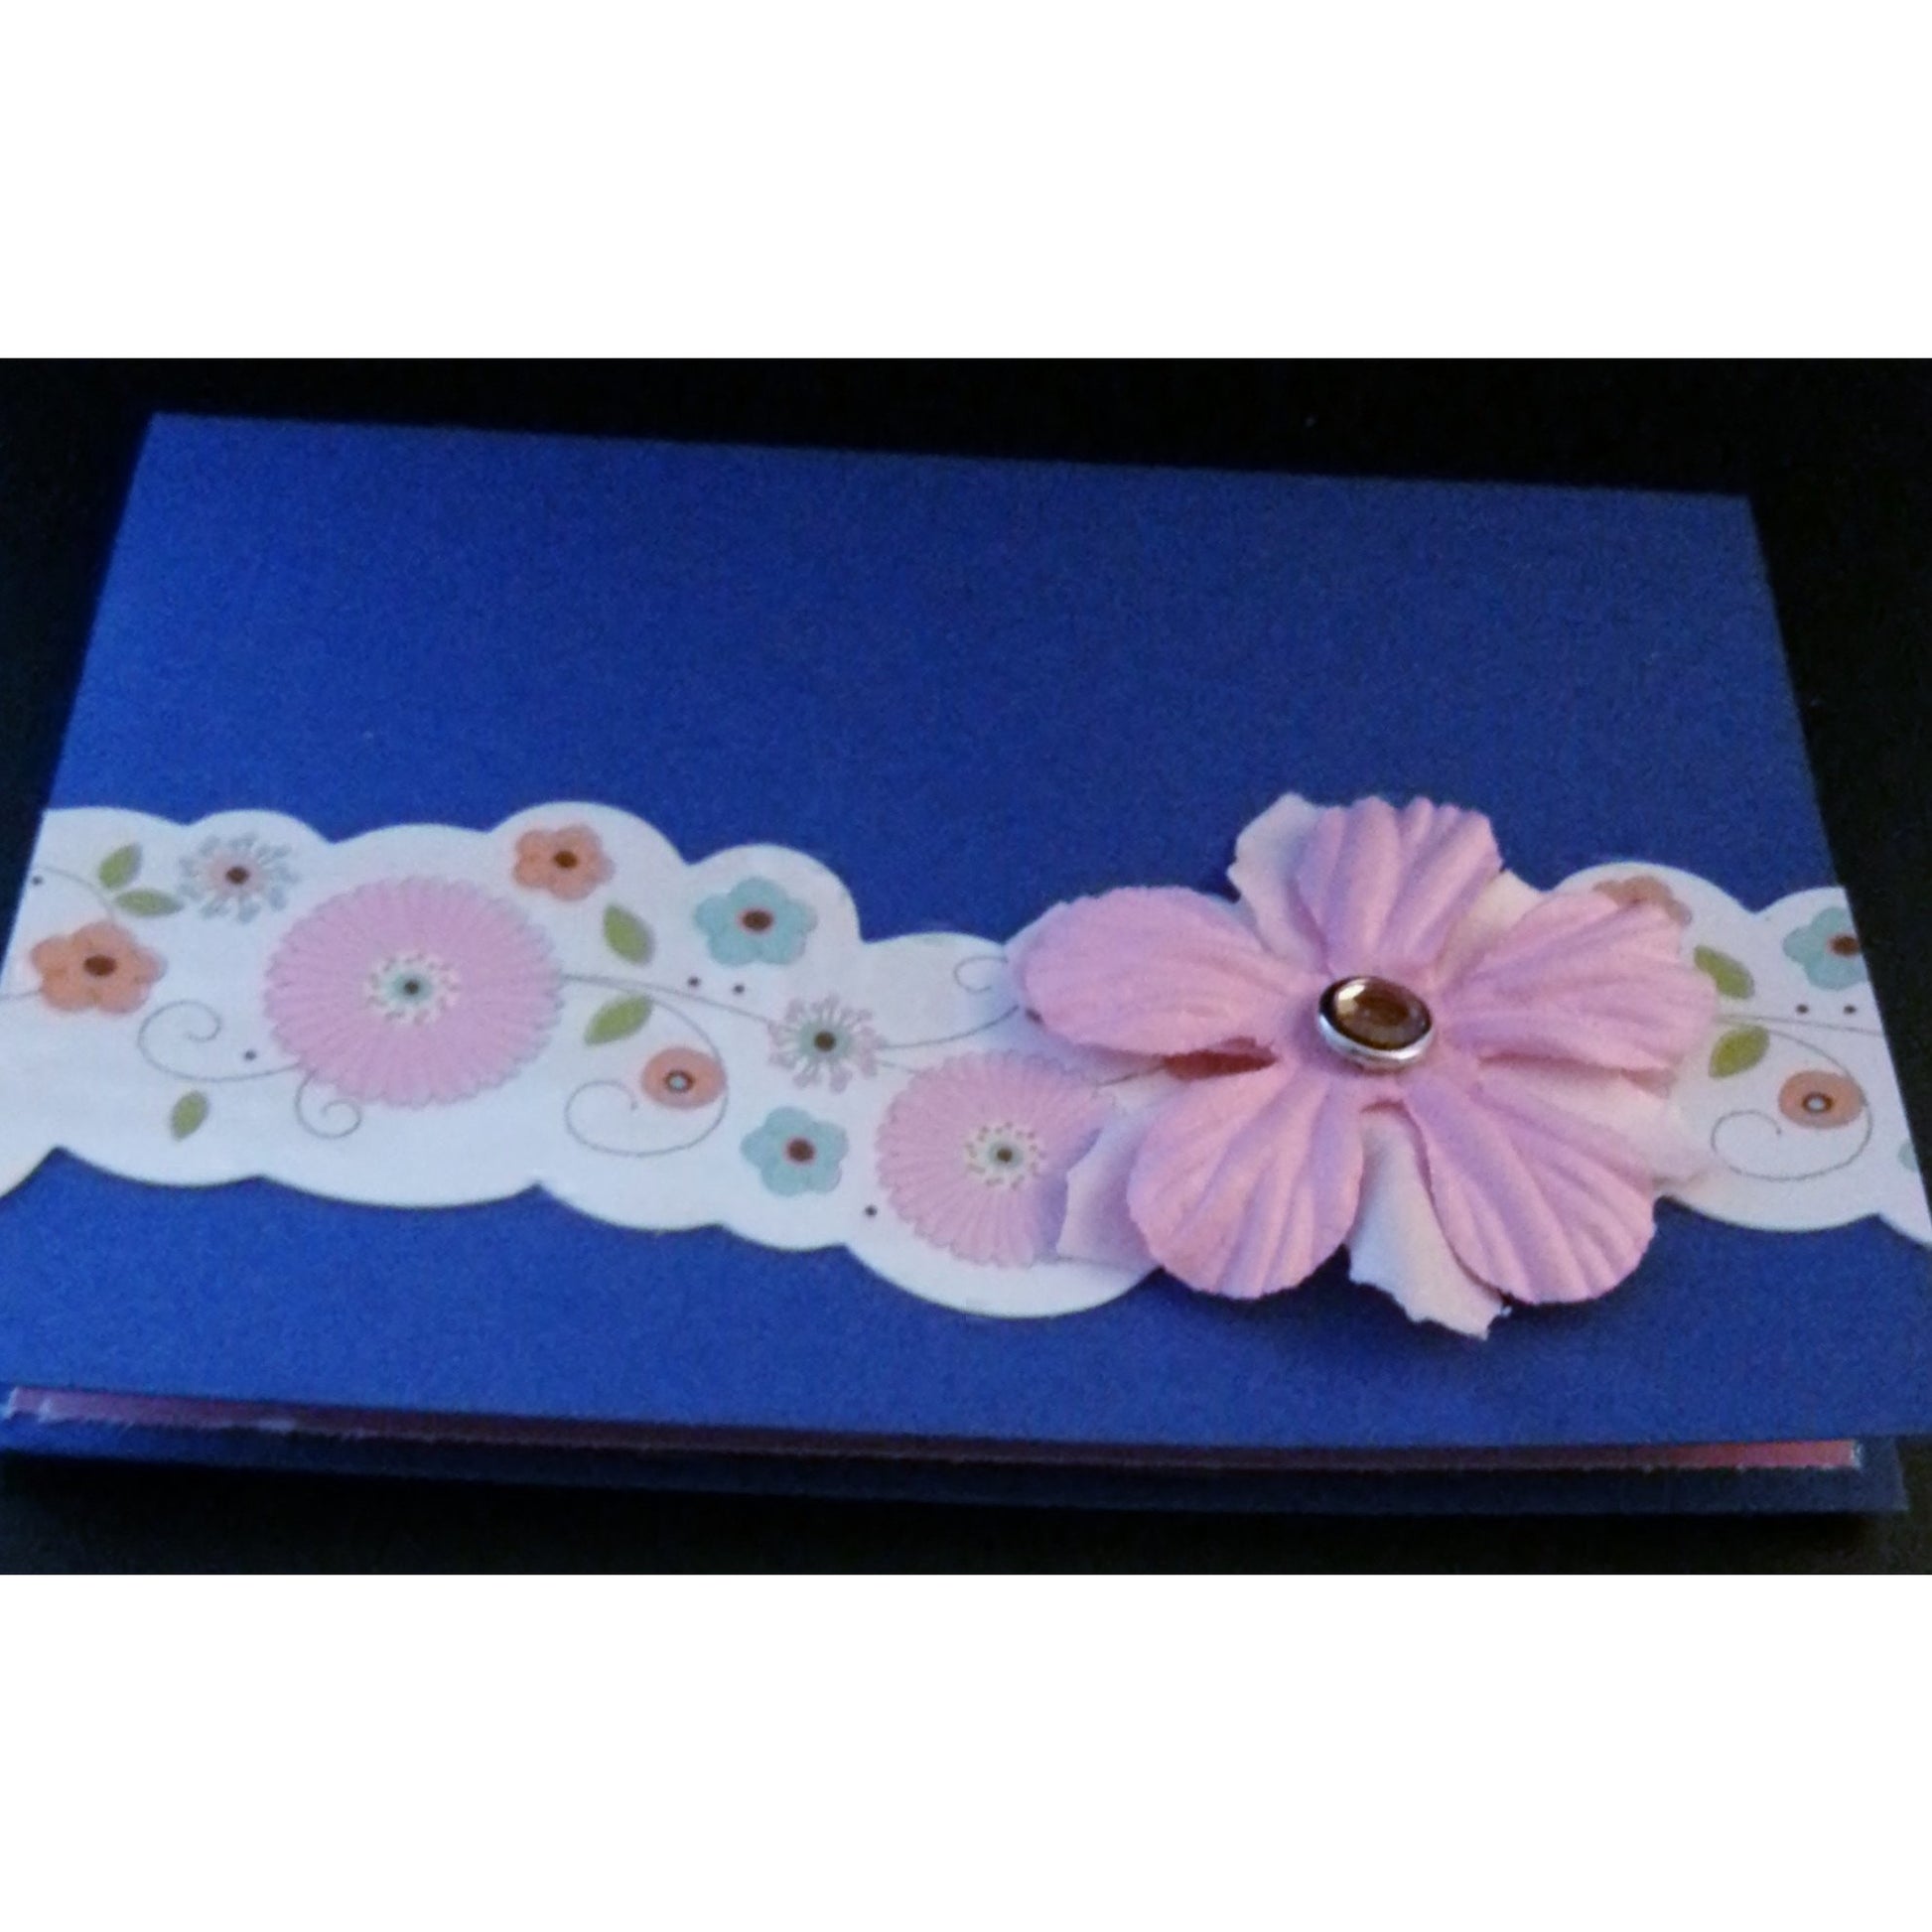 Birthday Wishes - Floral Handmade Good Greeting Supply Card - Cards And Other Paper Products - Made In U.S.A. - SharPharMade - 1